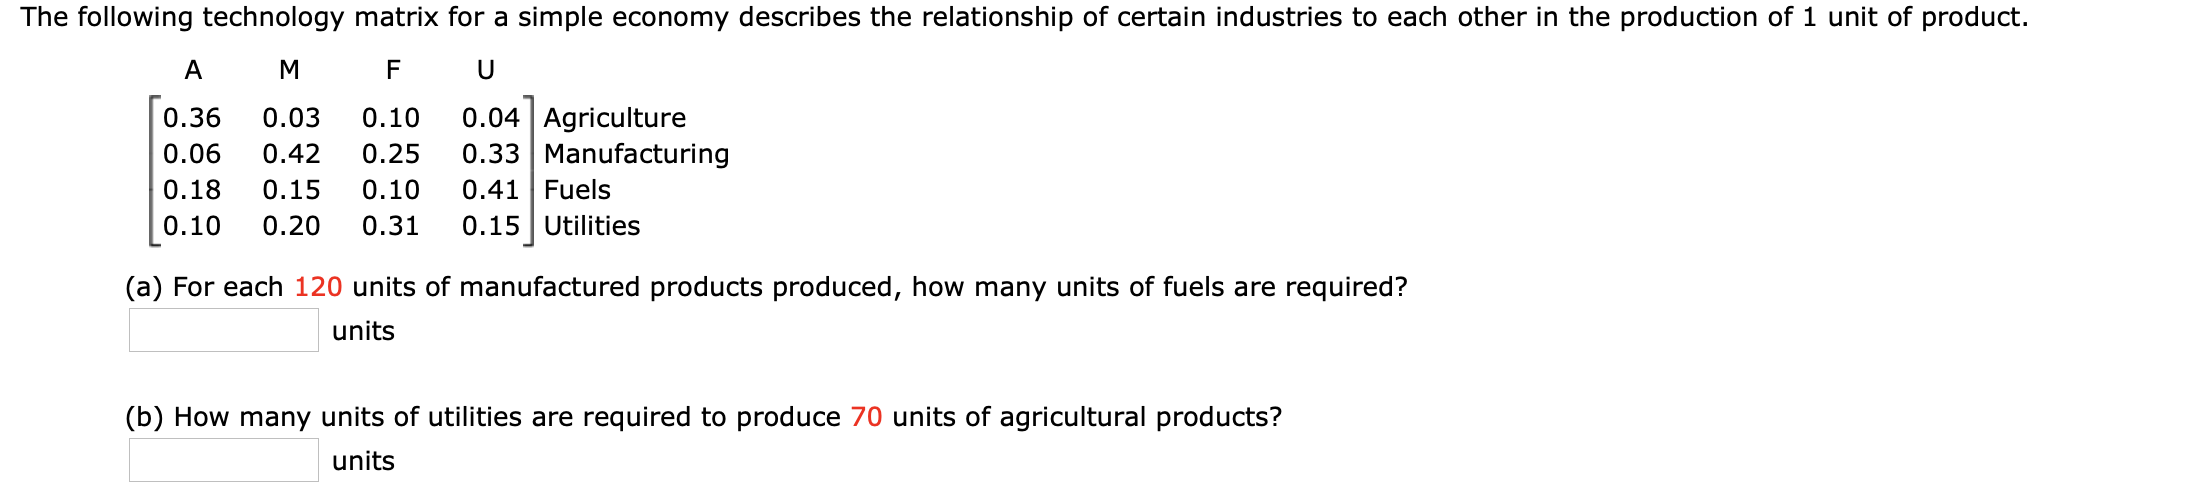 The following technology matrix for a simple economy describes the relationship of certain industries to each other in the production of 1 unit of product.
A
M
F
U
0.04 Agriculture
0.33 Manufacturing
0.41 Fuels
0.36
0.03
0.10
0.06
0.42
0.25
0.18
0.15
0.10
0.10
0.31
0.15 Utilities
0.20
(a) For each 120 units of manufactured products produced, how many units of fuels are required?
units
(b) How many units of utilities are required to produce 70 units of agricultural products?
units
